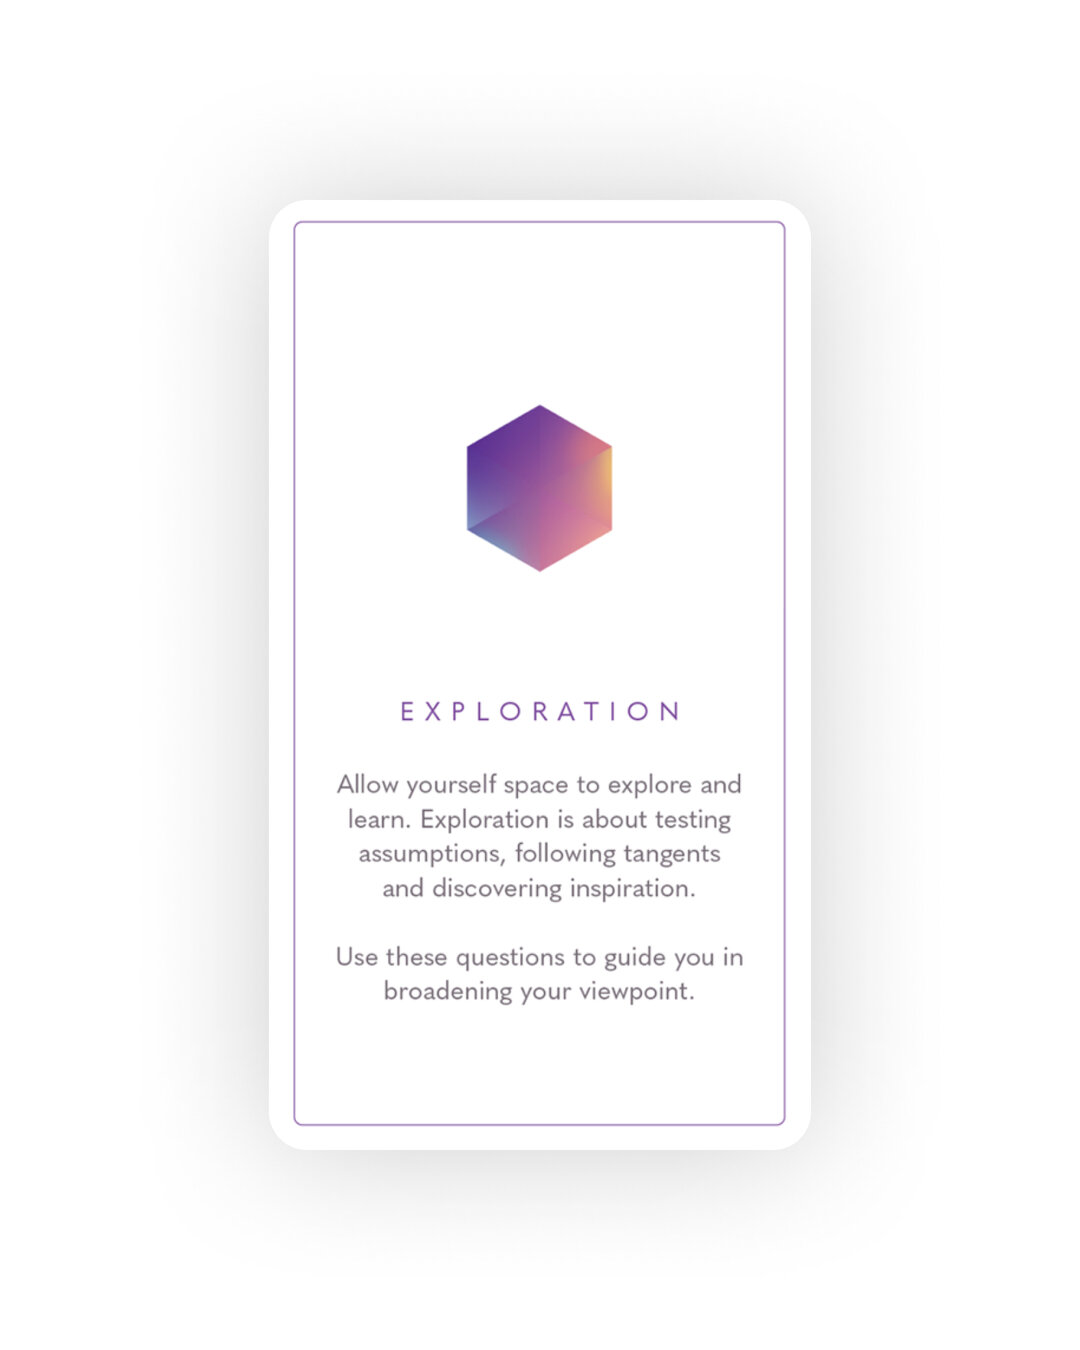 Exploration⠀⠀⠀⠀⠀⠀⠀⠀⠀
✨⠀⠀⠀⠀⠀⠀⠀⠀⠀
Allow yourself space to explore and learn. Exploration is about testing assumptions, following tangents and discovering inspiration.⠀⠀⠀⠀⠀⠀⠀⠀⠀
Use these questions to guide you in broadening your viewpoint.⠀⠀⠀⠀⠀⠀⠀⠀⠀
.⠀⠀⠀